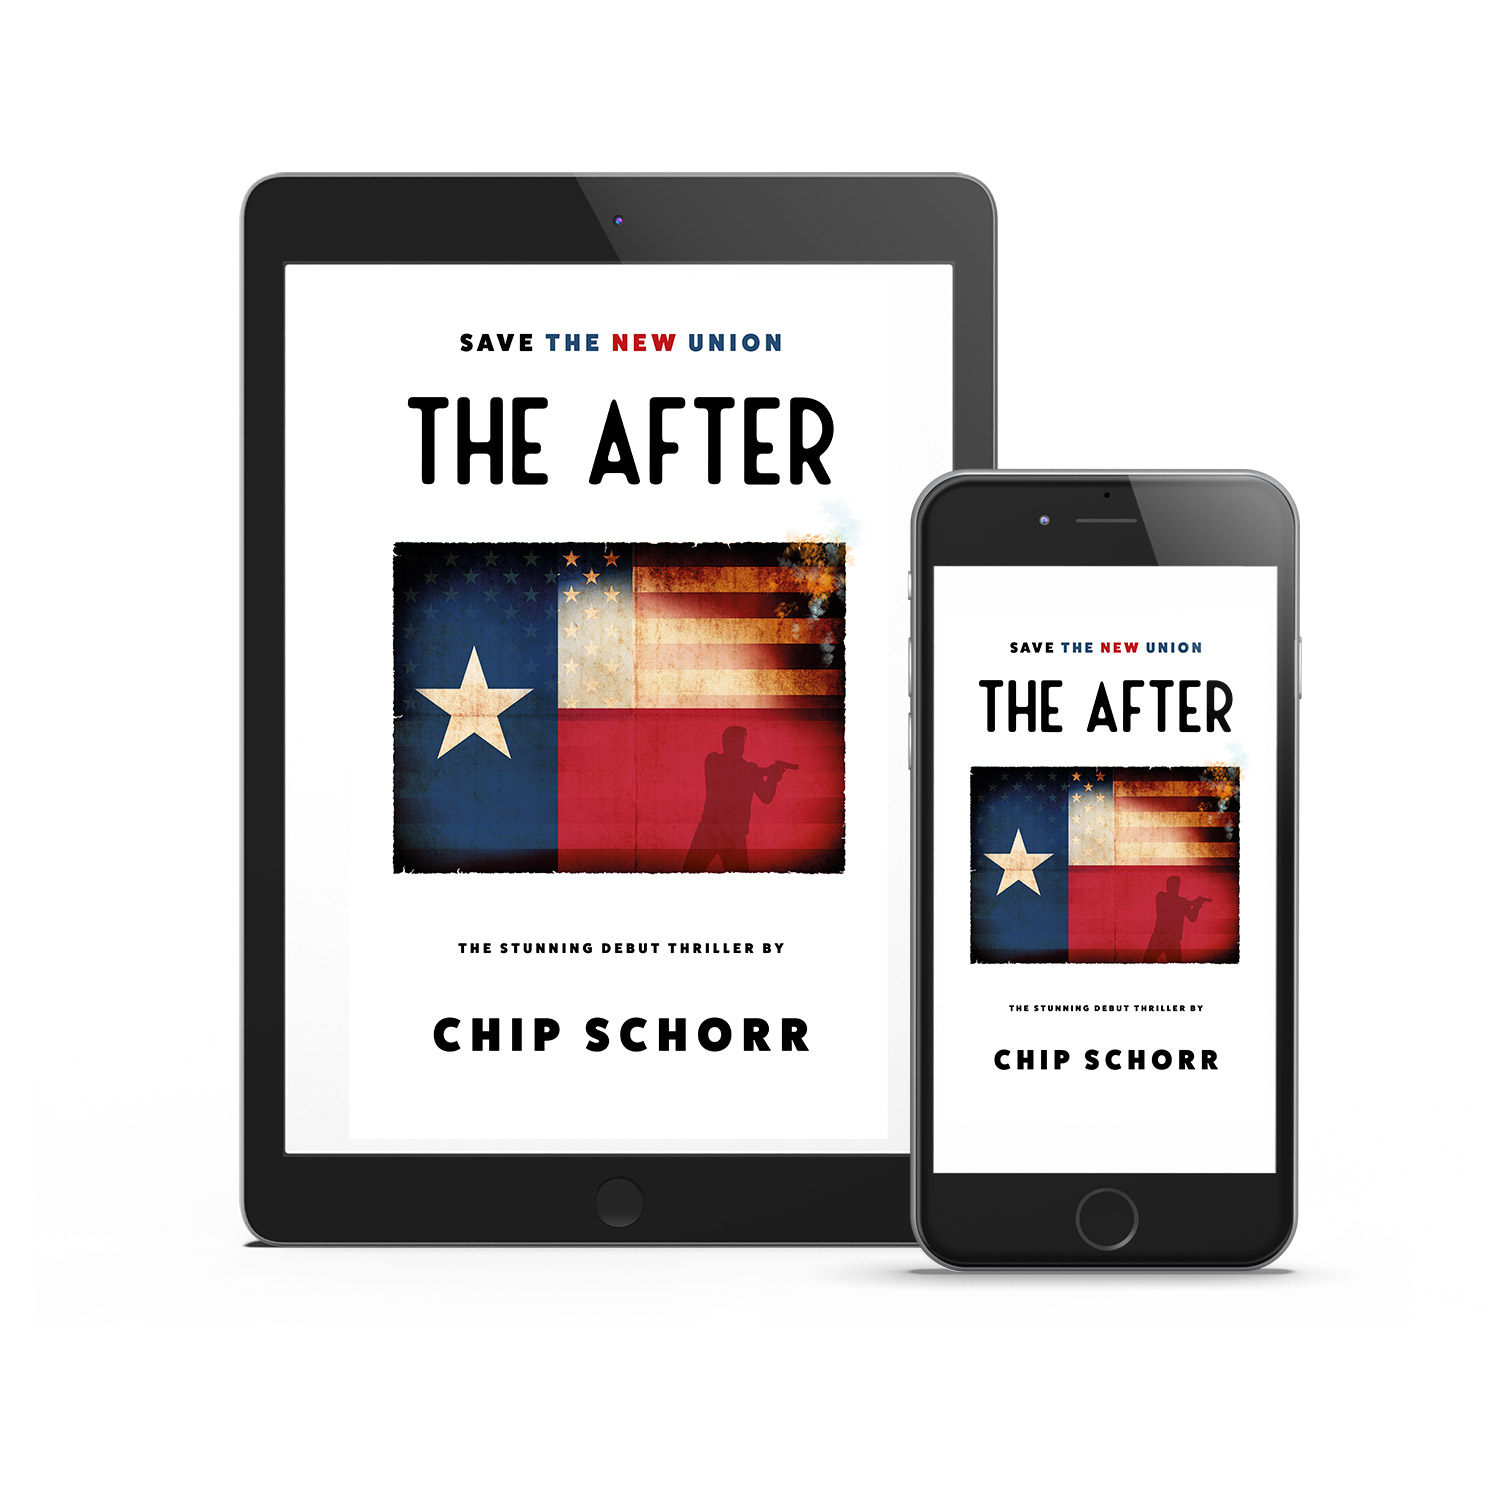 'The After' is a breakneck conspiracy thriller novel by author Chip Schorr. The book cover and interior were designed by Mark Thomas, of coverness.com. To find out more about my book design services, please visit www.coverness.com